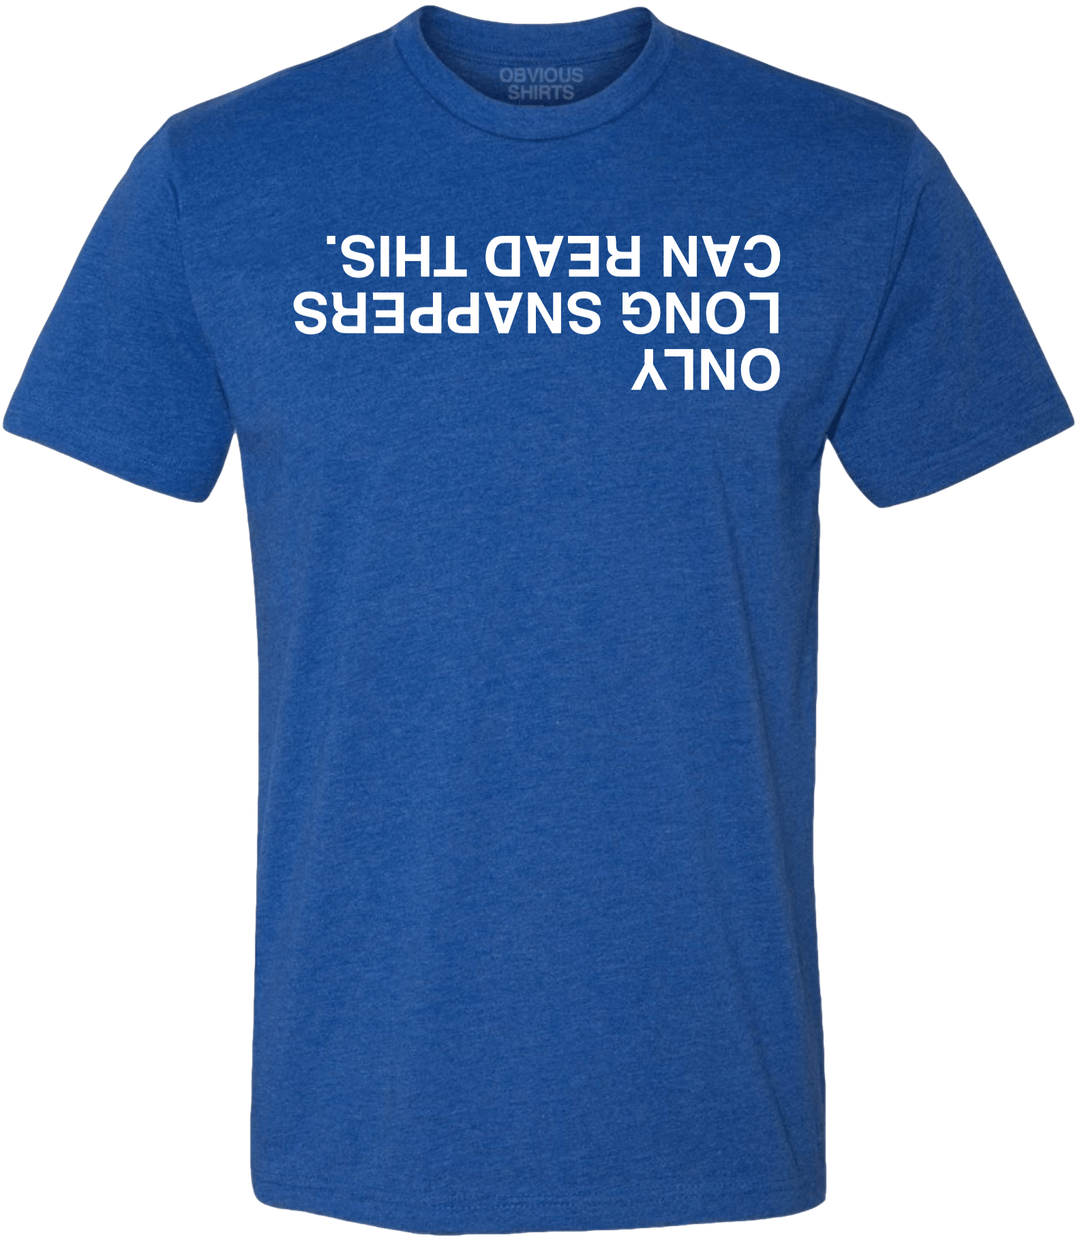 ONLY LONG SNAPPERS CAN READ THIS. (BLUE) - OBVIOUS SHIRTS